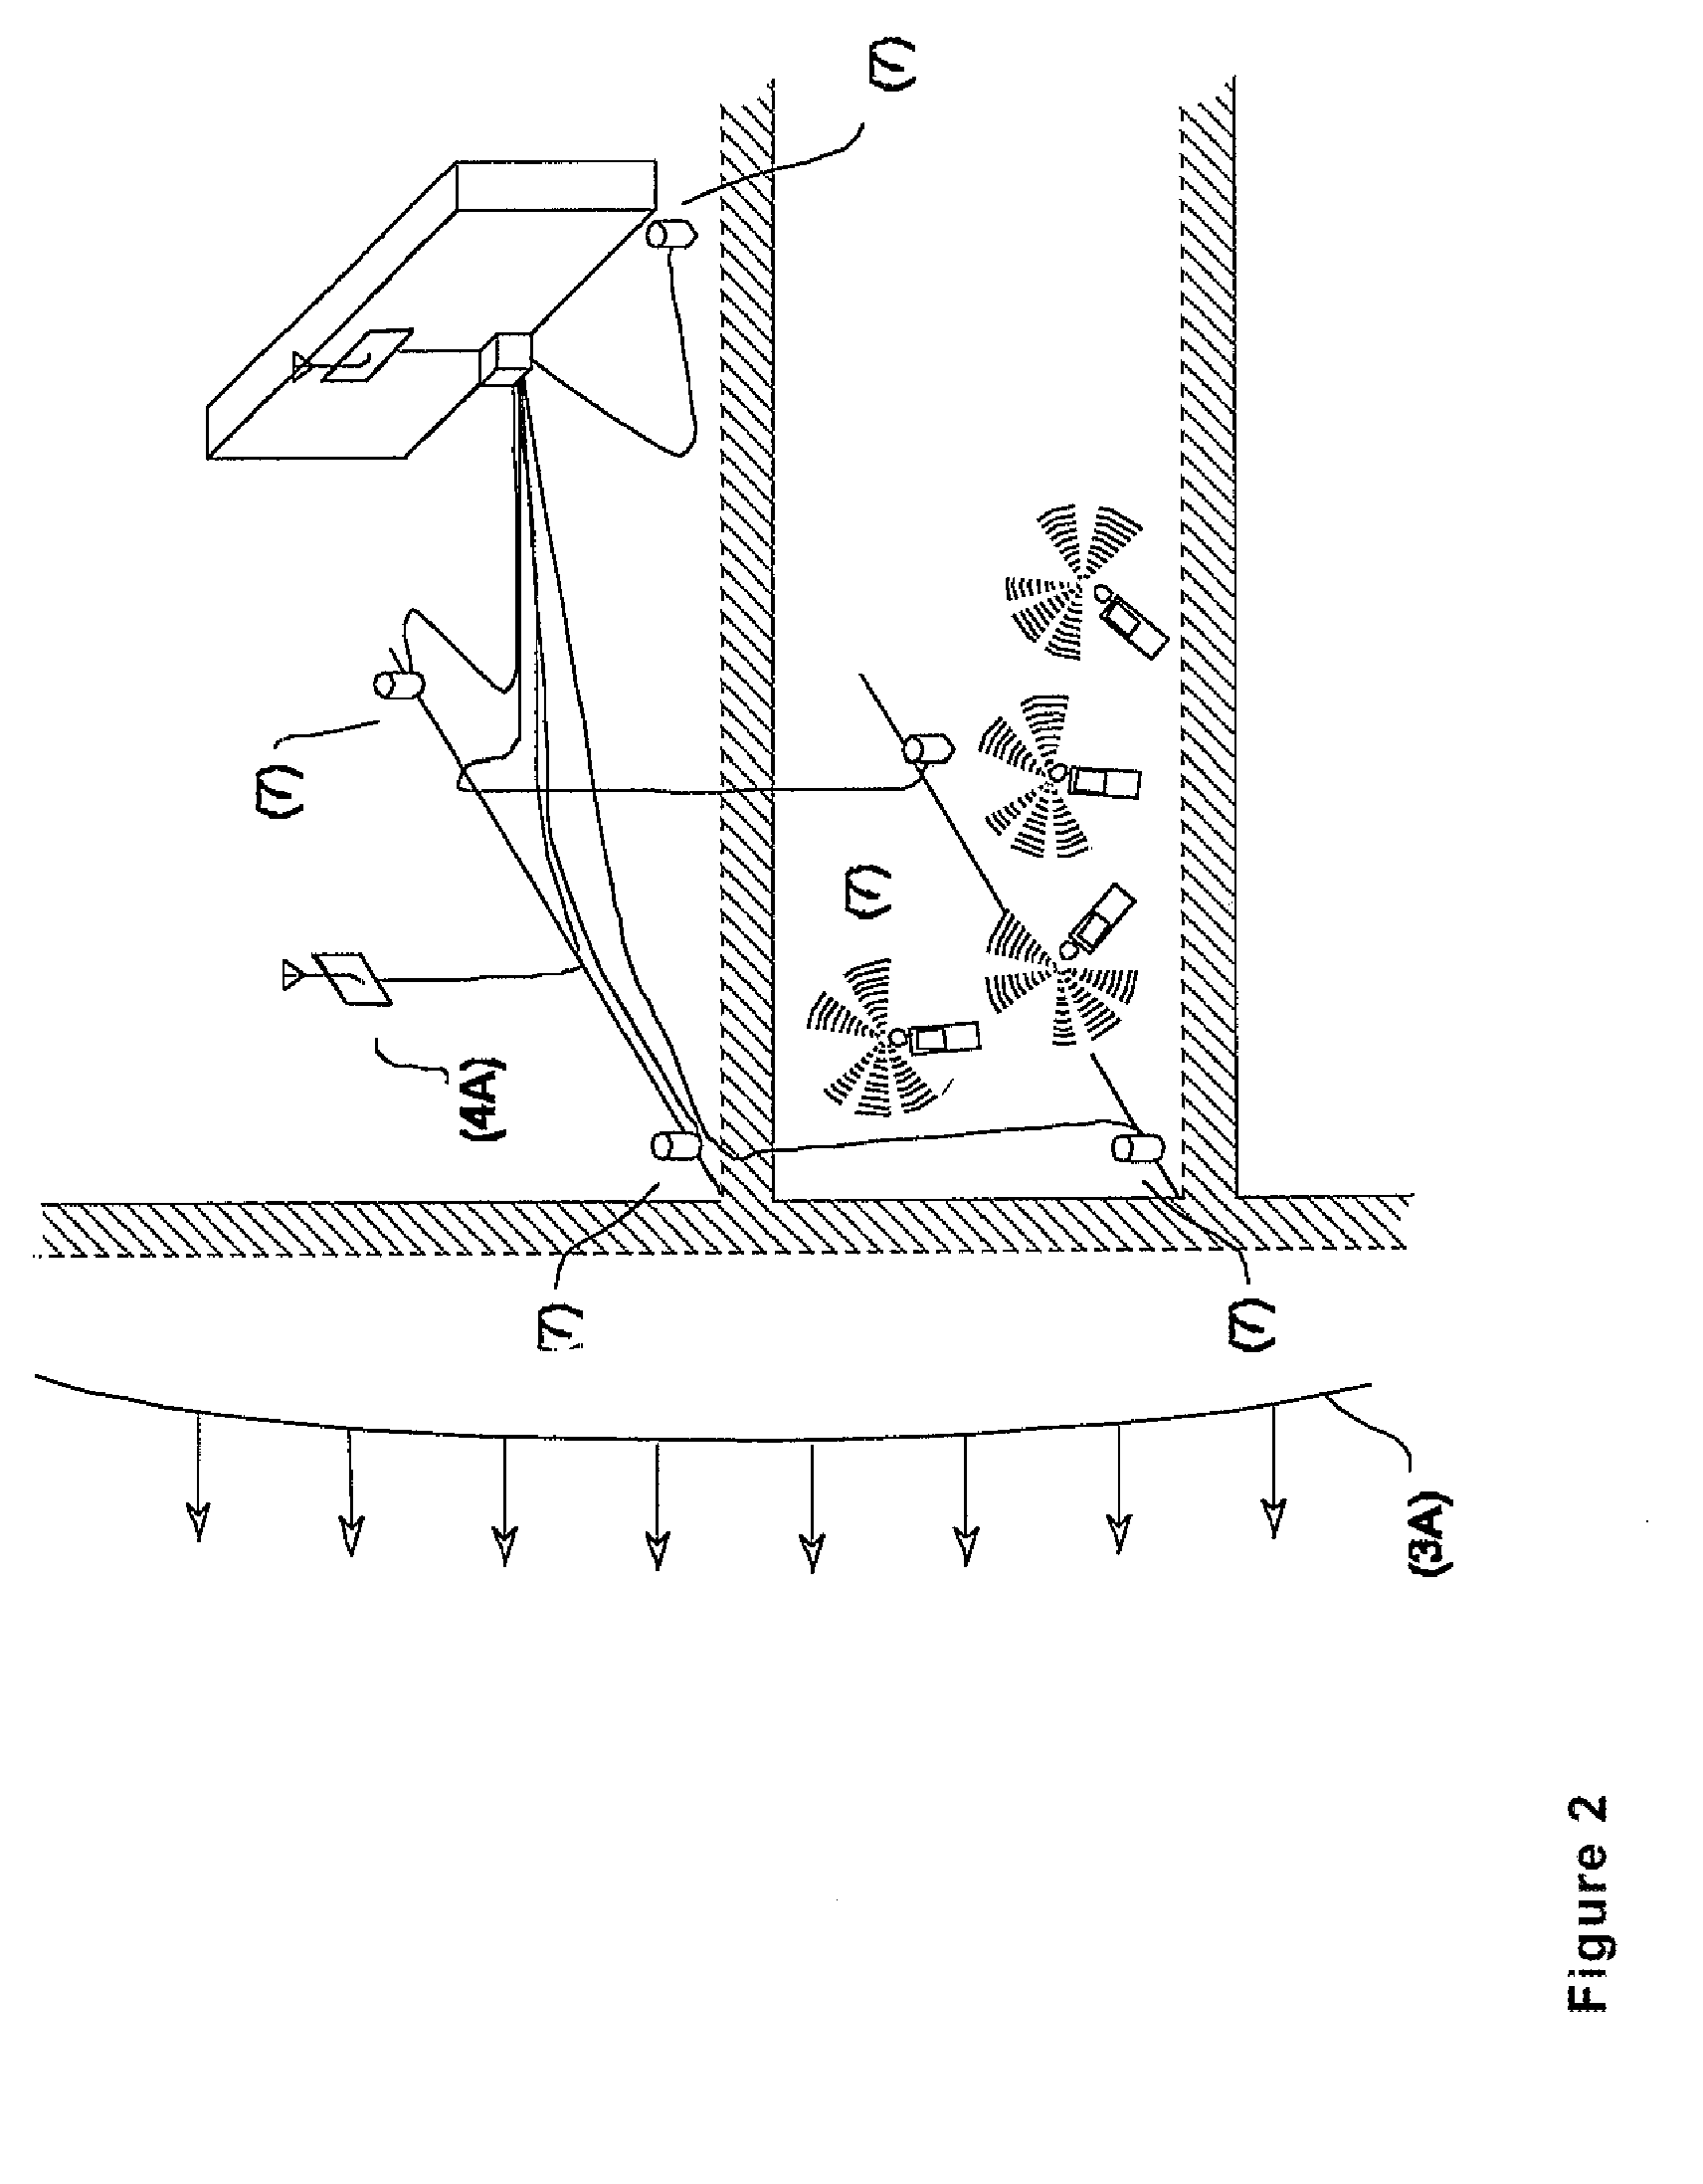 Photonic cell control device and method for ultra-wideband (UWB) transmitters/receivers